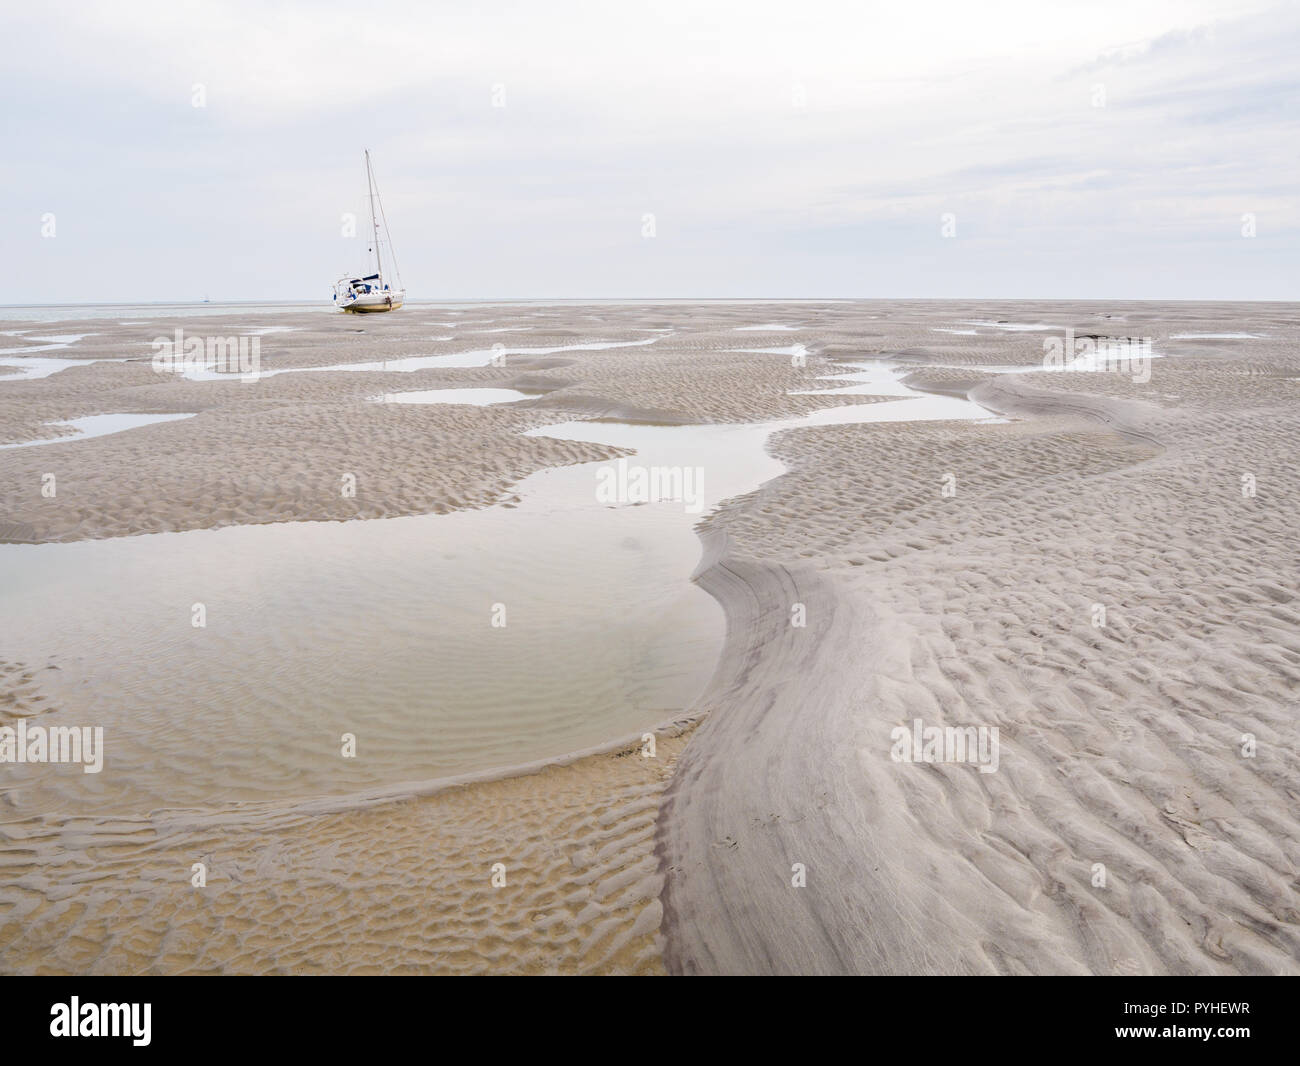 Sailboat dried out on sand flats of tidal sea Waddensea near Boschplaat, Terschelling, Netherlands Stock Photo